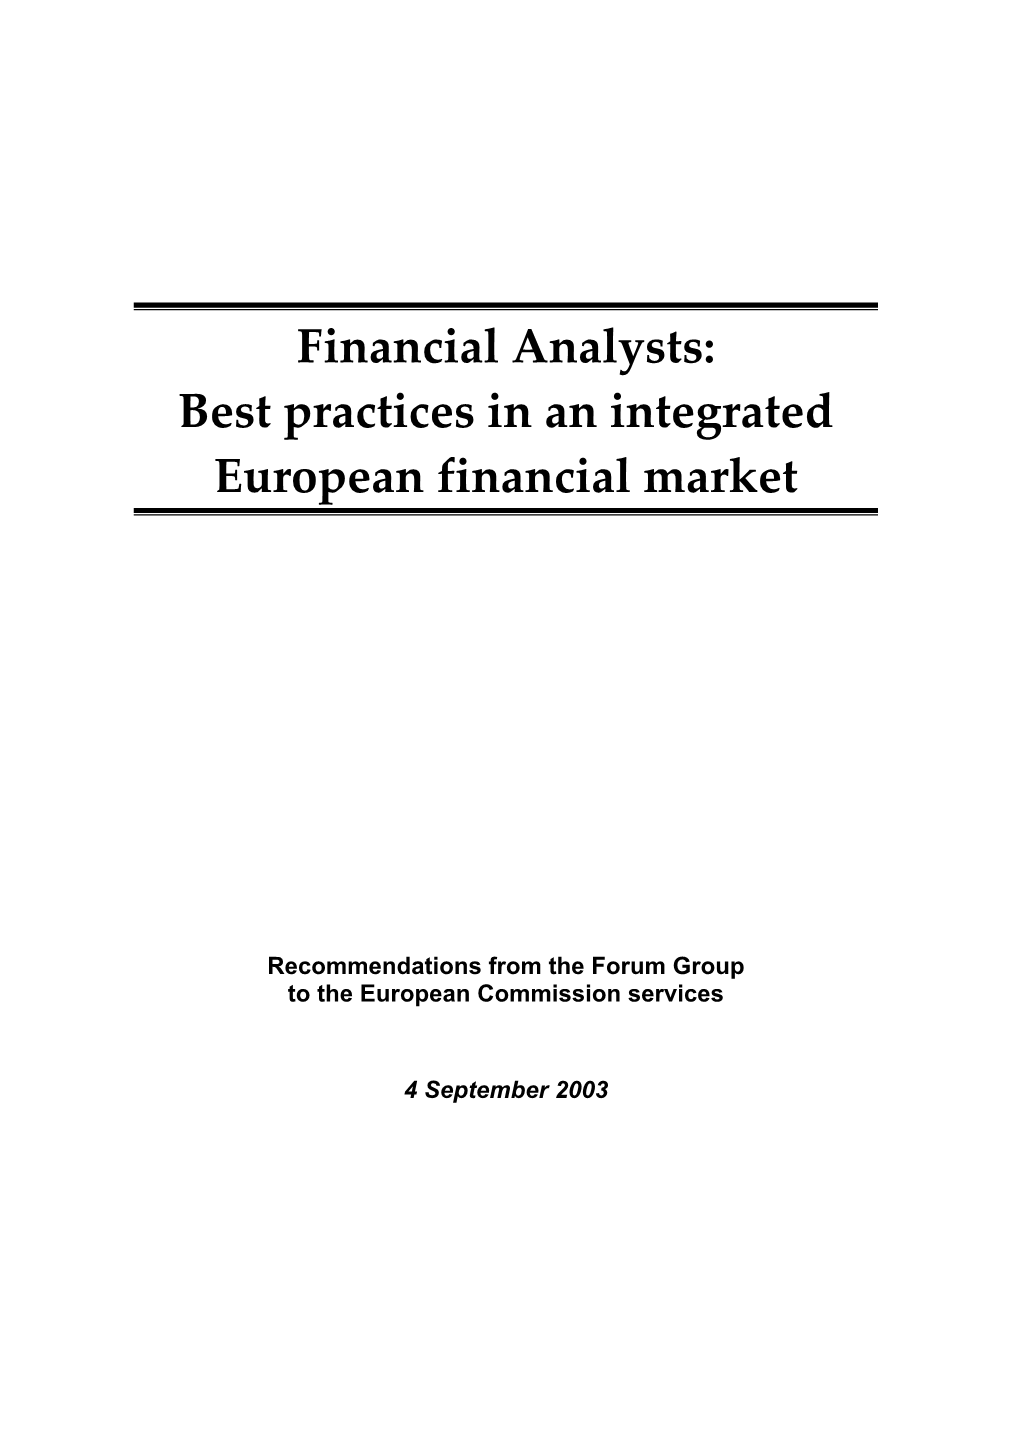 Best Practices in an Integrated European Financial Market